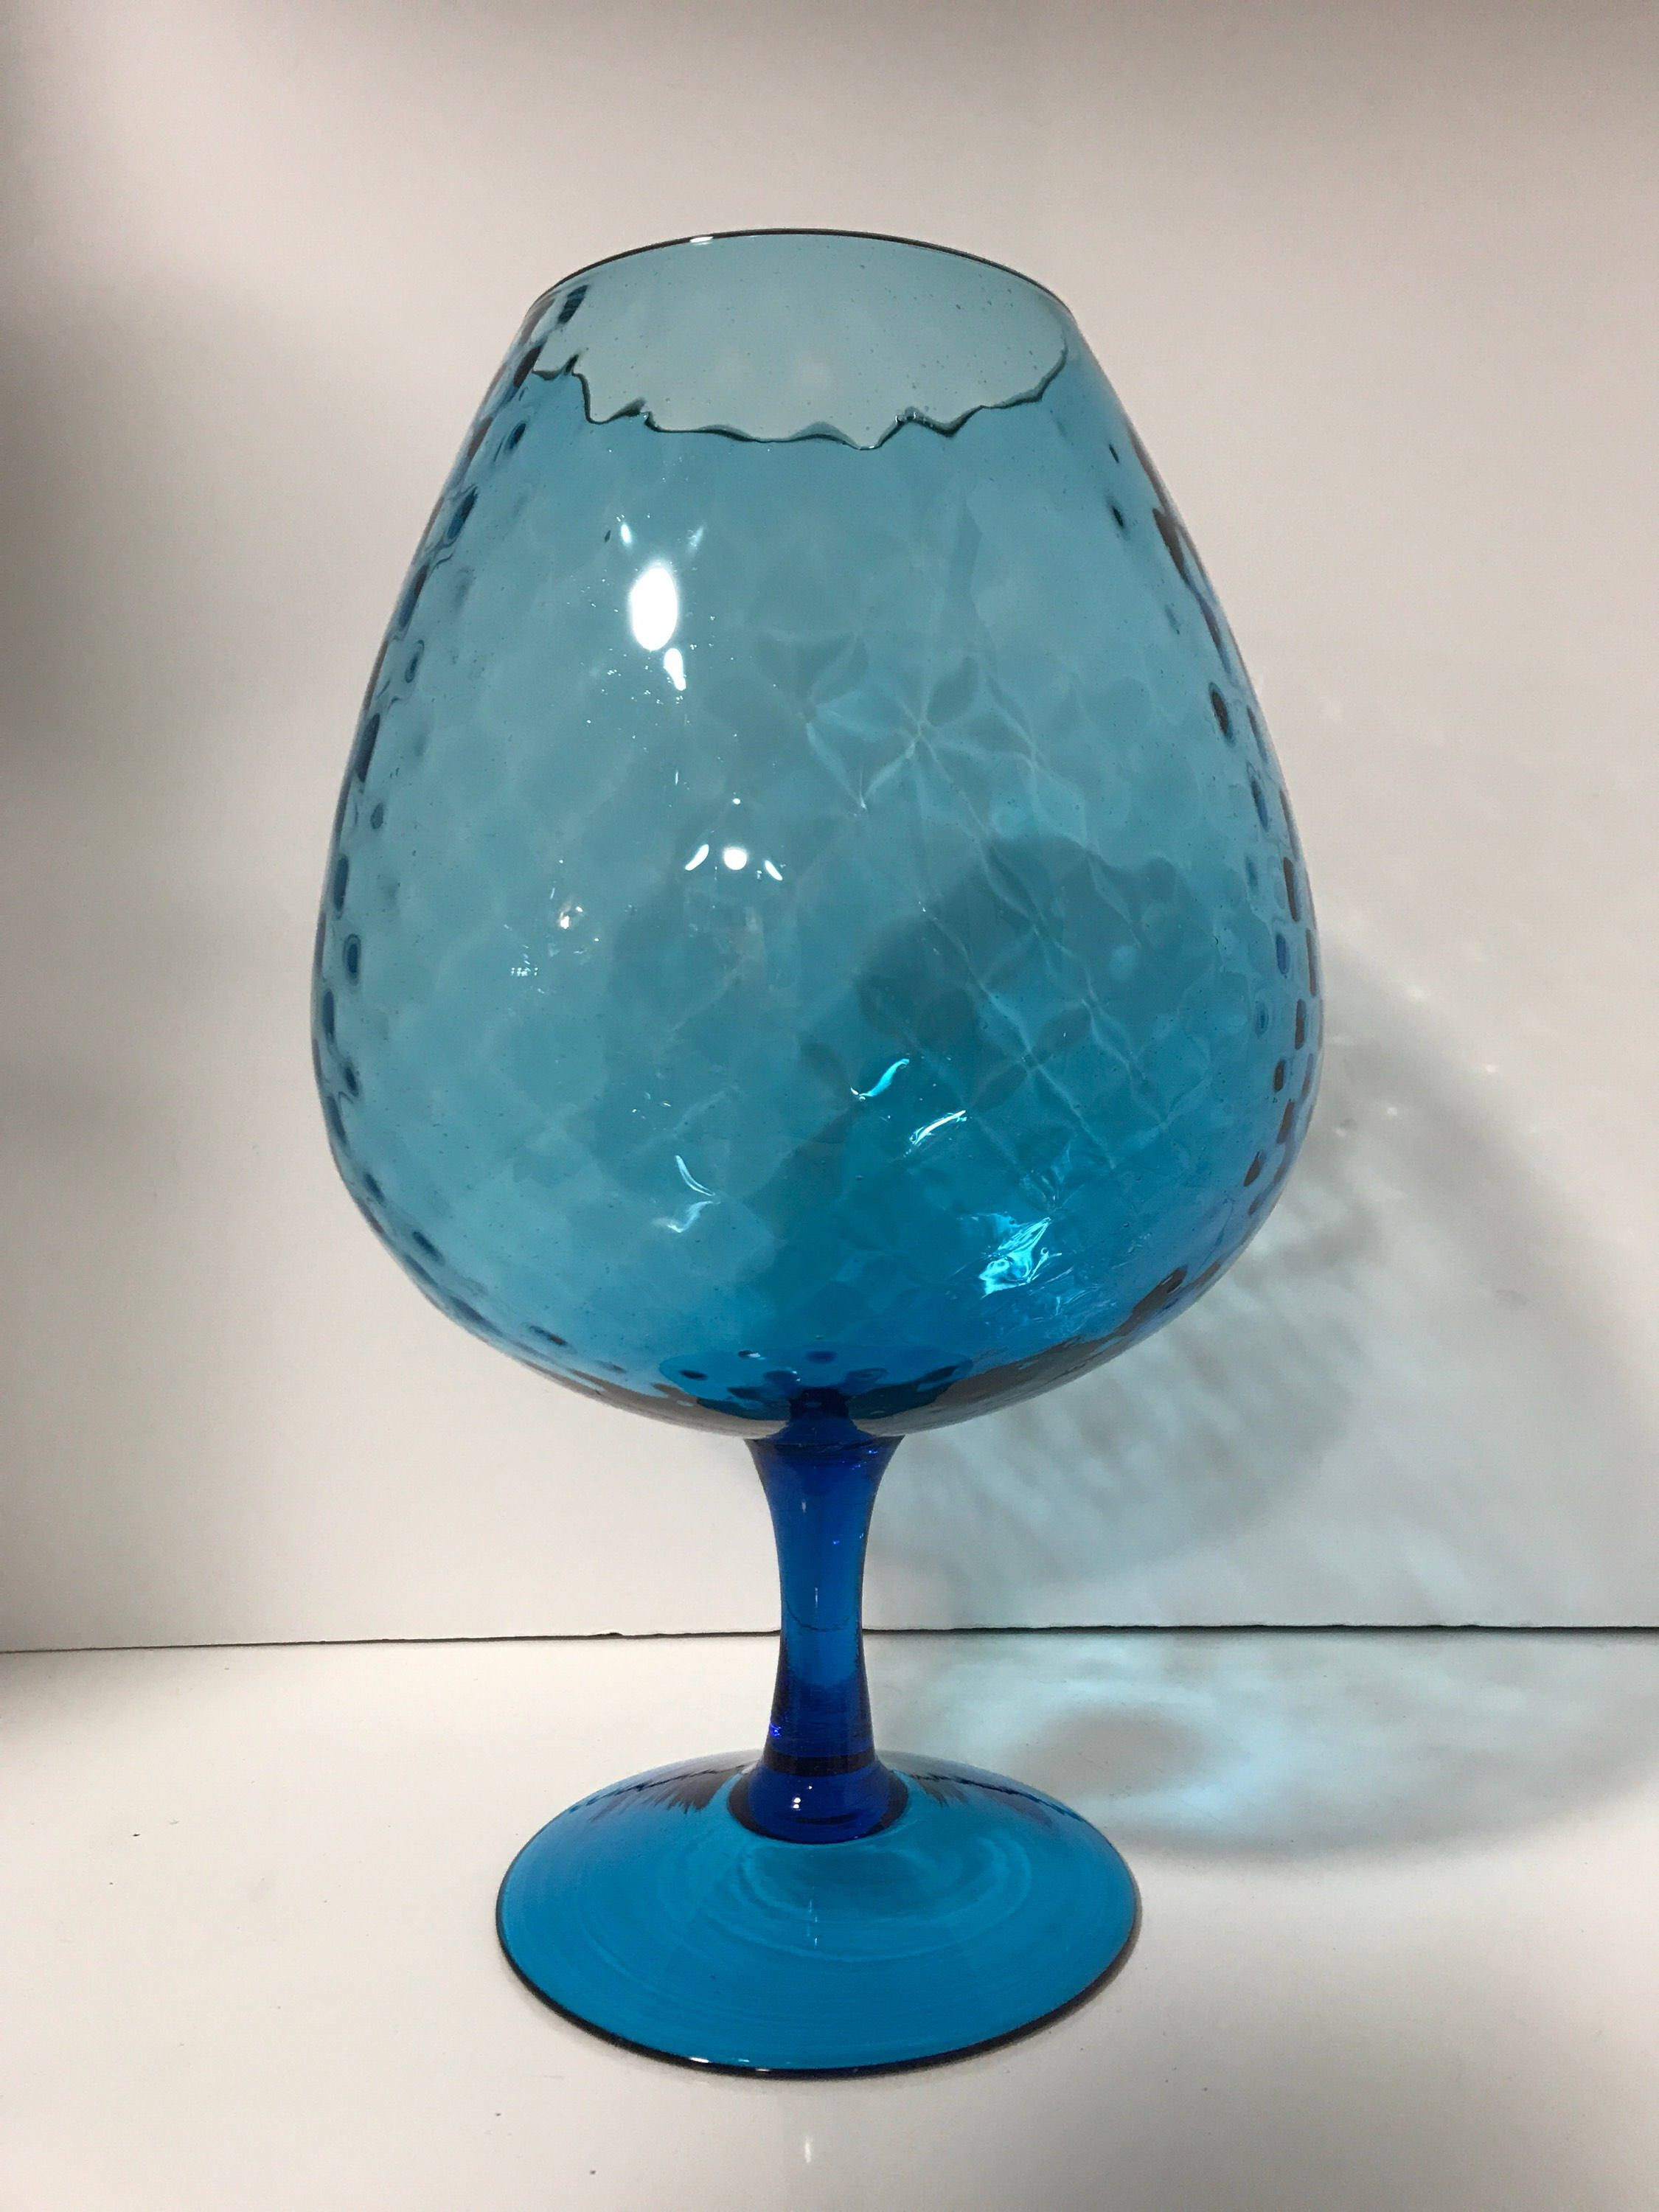 23 Unique Extra Large Crystal Vase 2024 free download extra large crystal vase of vintage blue empoli glass snifter style vase blue diamond optic for a personal favorite from my etsy shop https www etsy com listing 589594501 vintage blue empoli